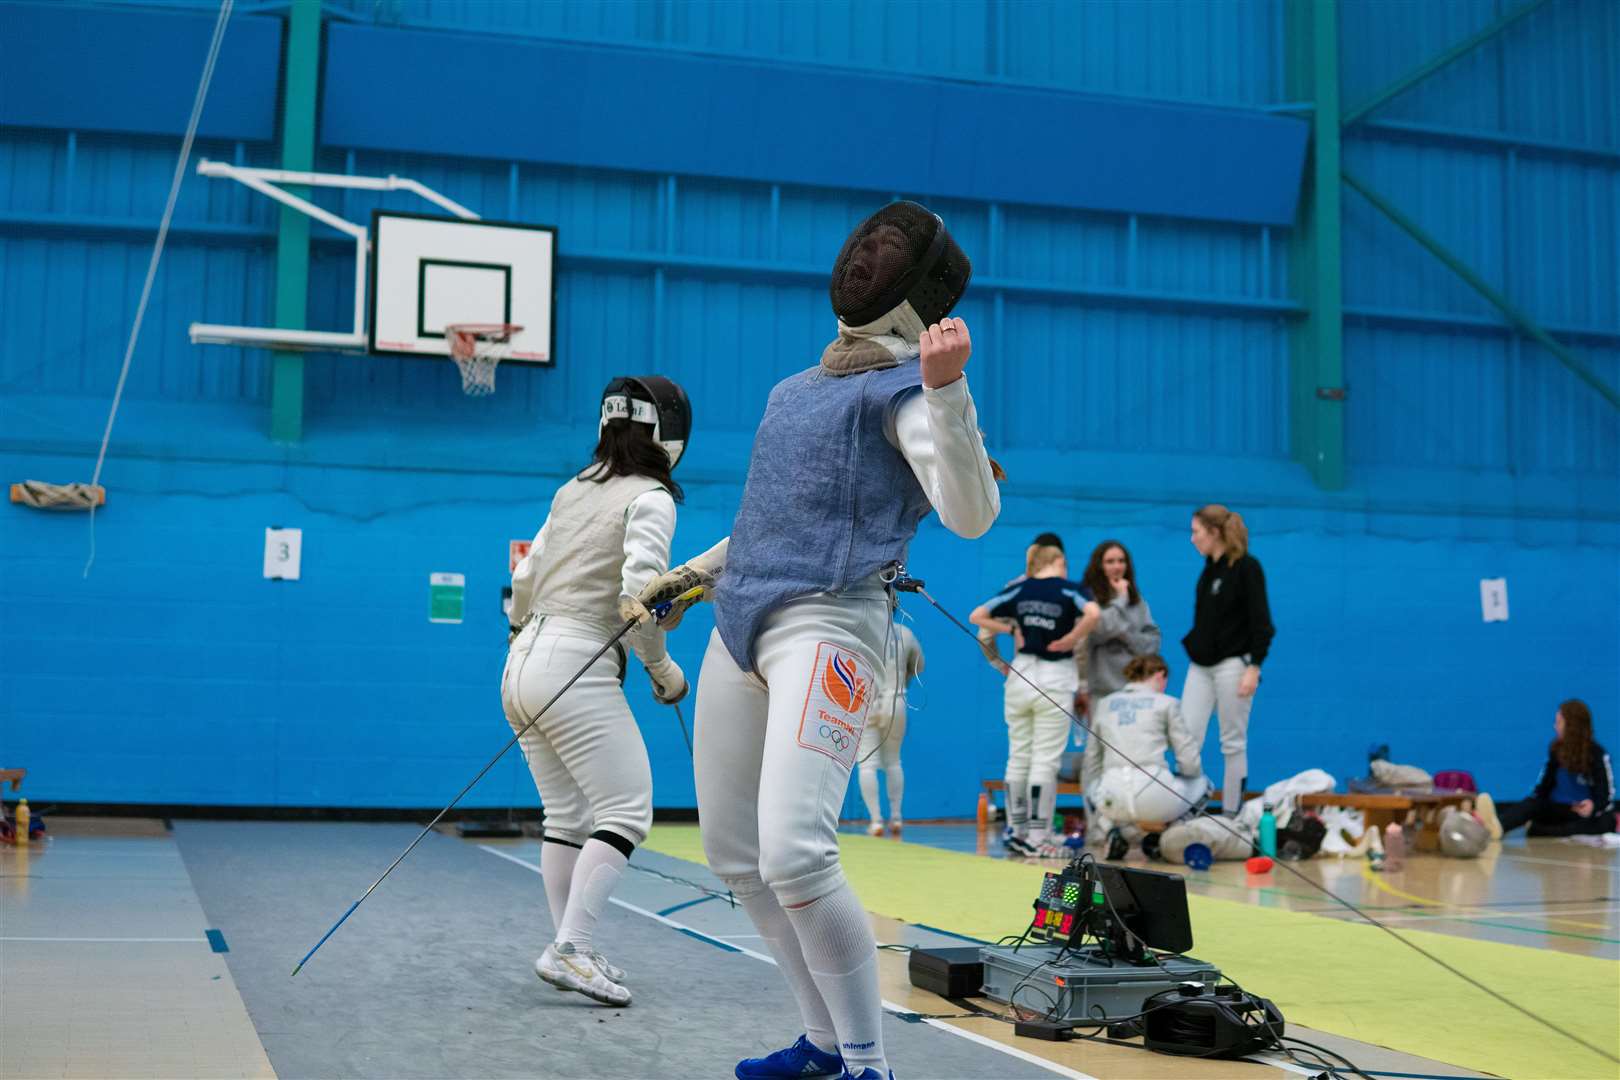 Action taking place at the University of Kent Fencing Club